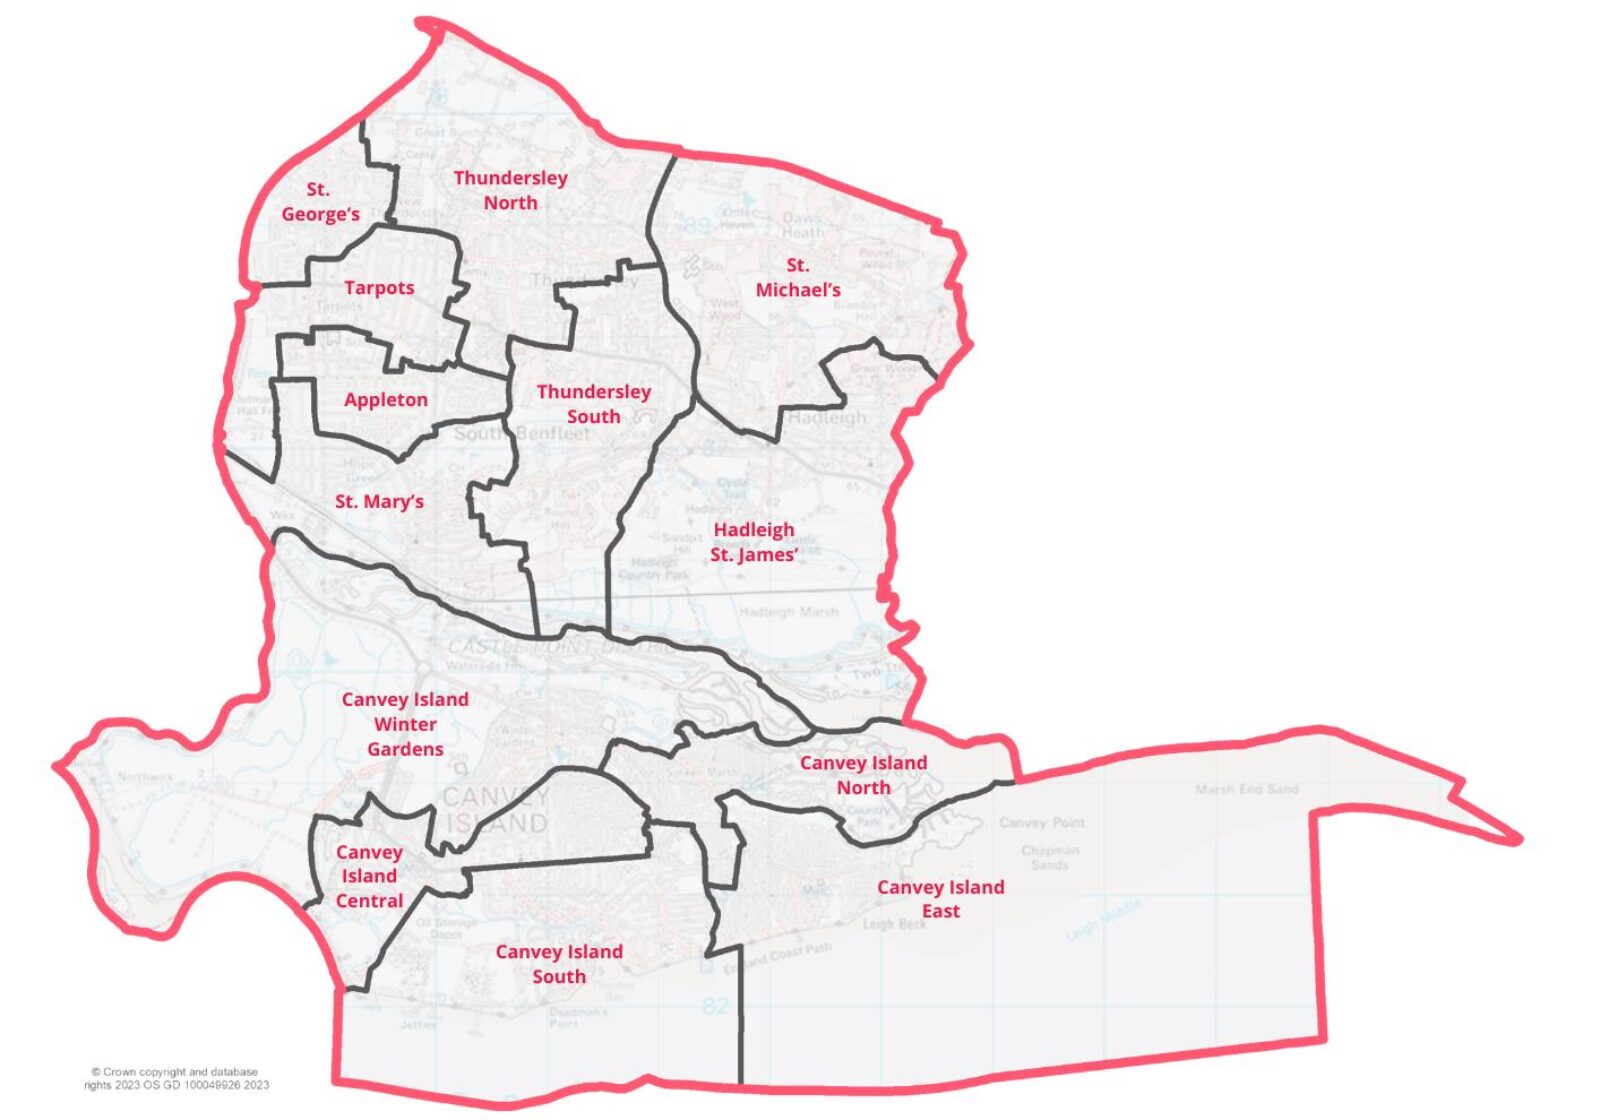 Borough Council Wards on Canvey Island